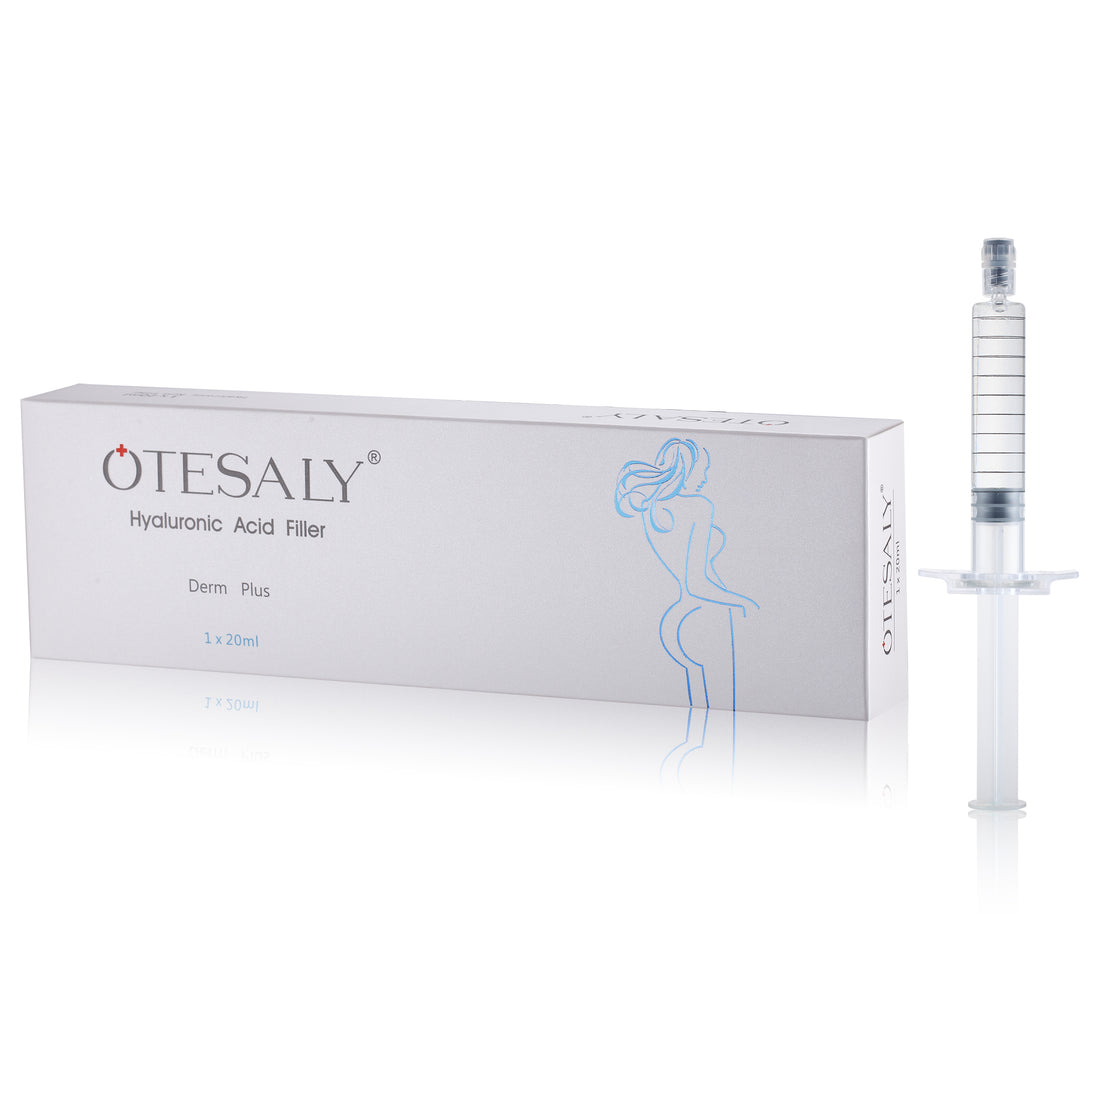 Otesaly Derm Plus Body Filler for Breast &amp; Buttock Enlargement